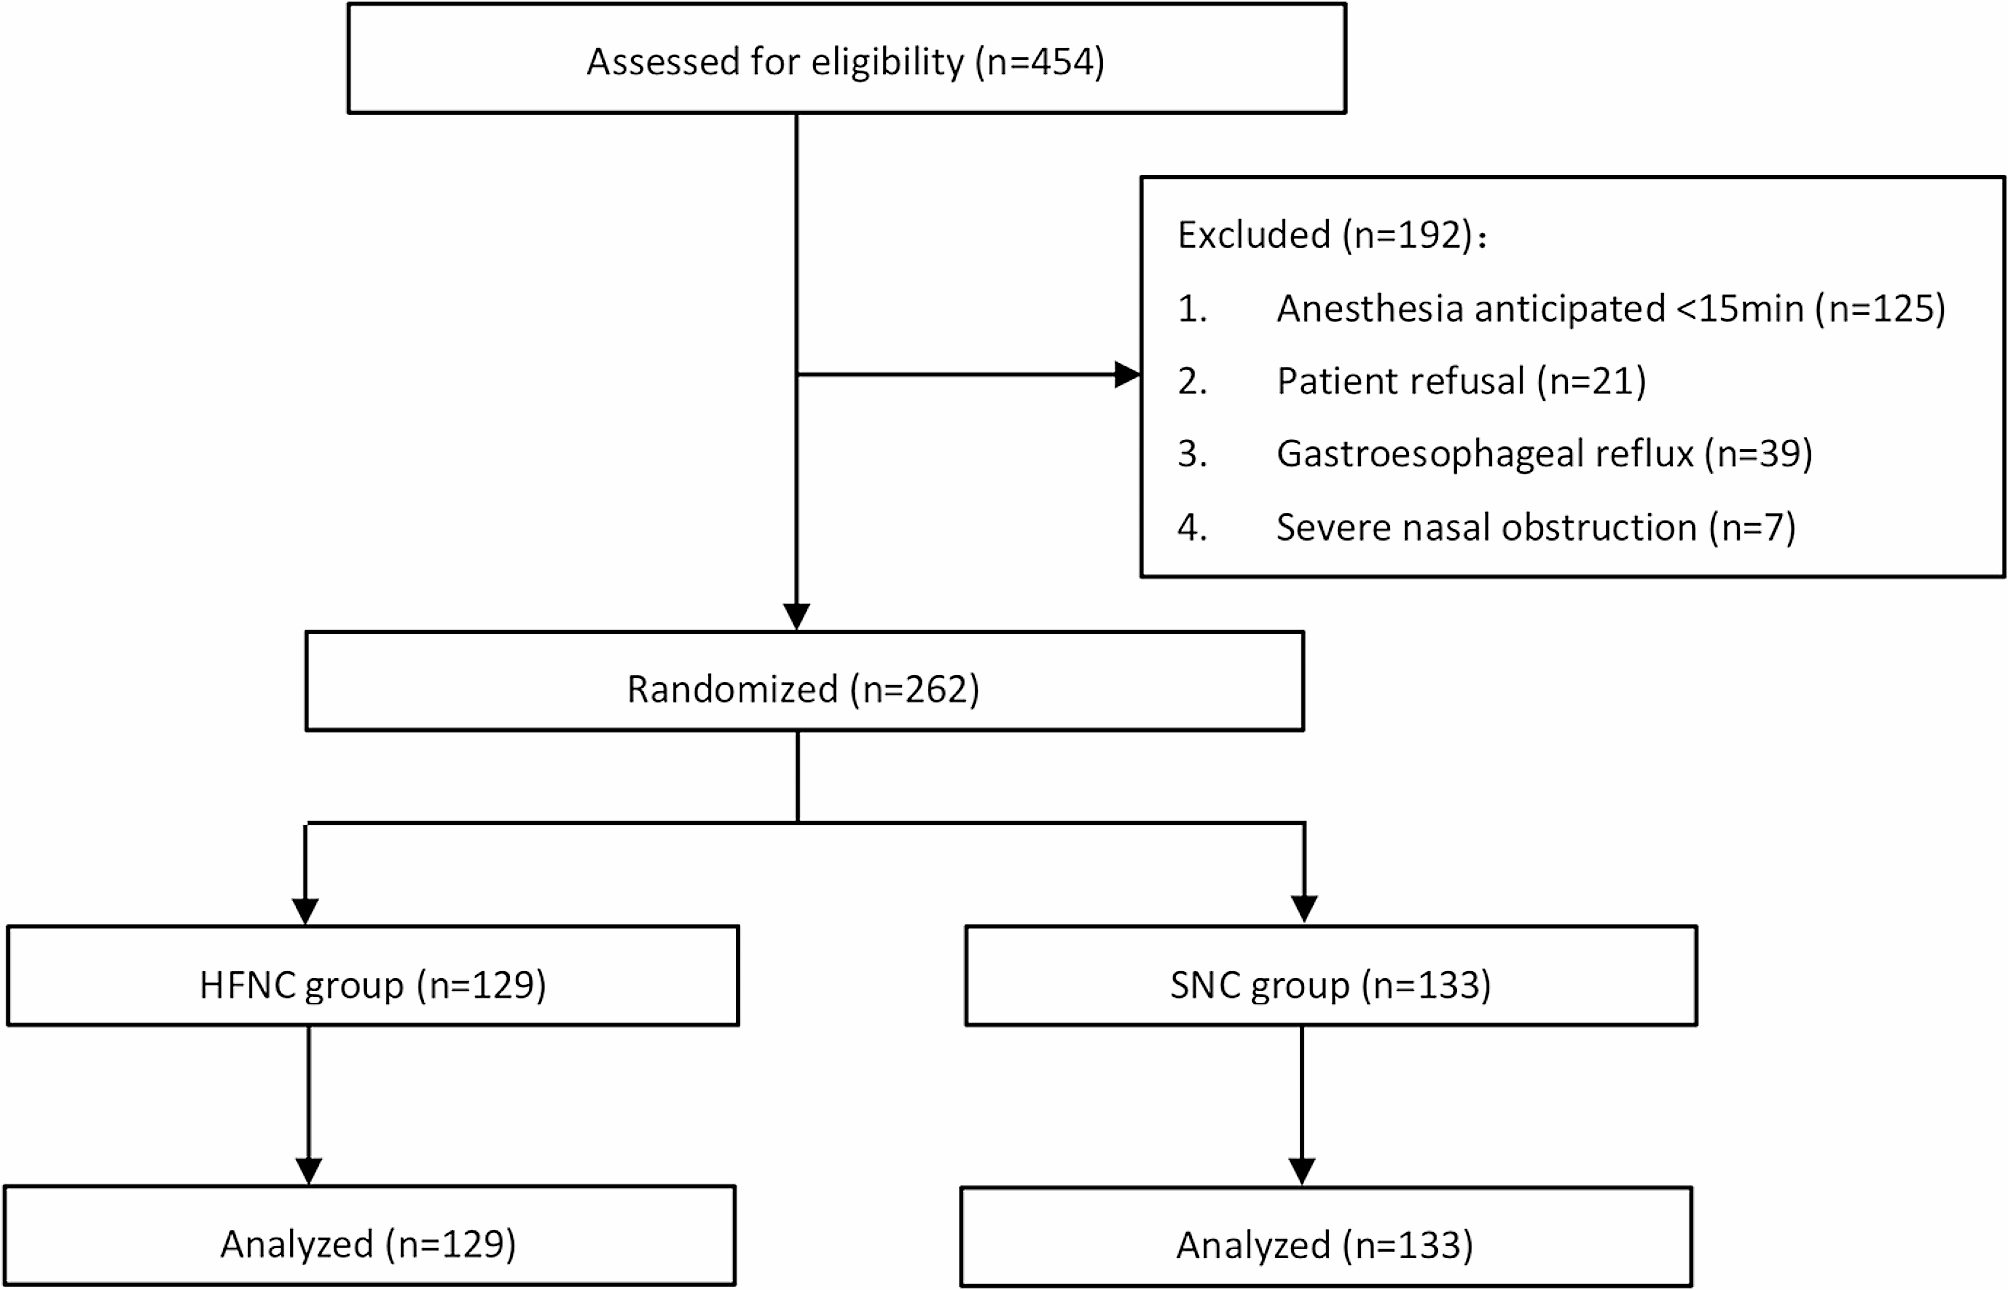 High-flow nasal cannula oxygen reduced hypoxemia in patients undergoing gastroscopy under general anesthesia at ultra-high altitude: a randomized controlled trial